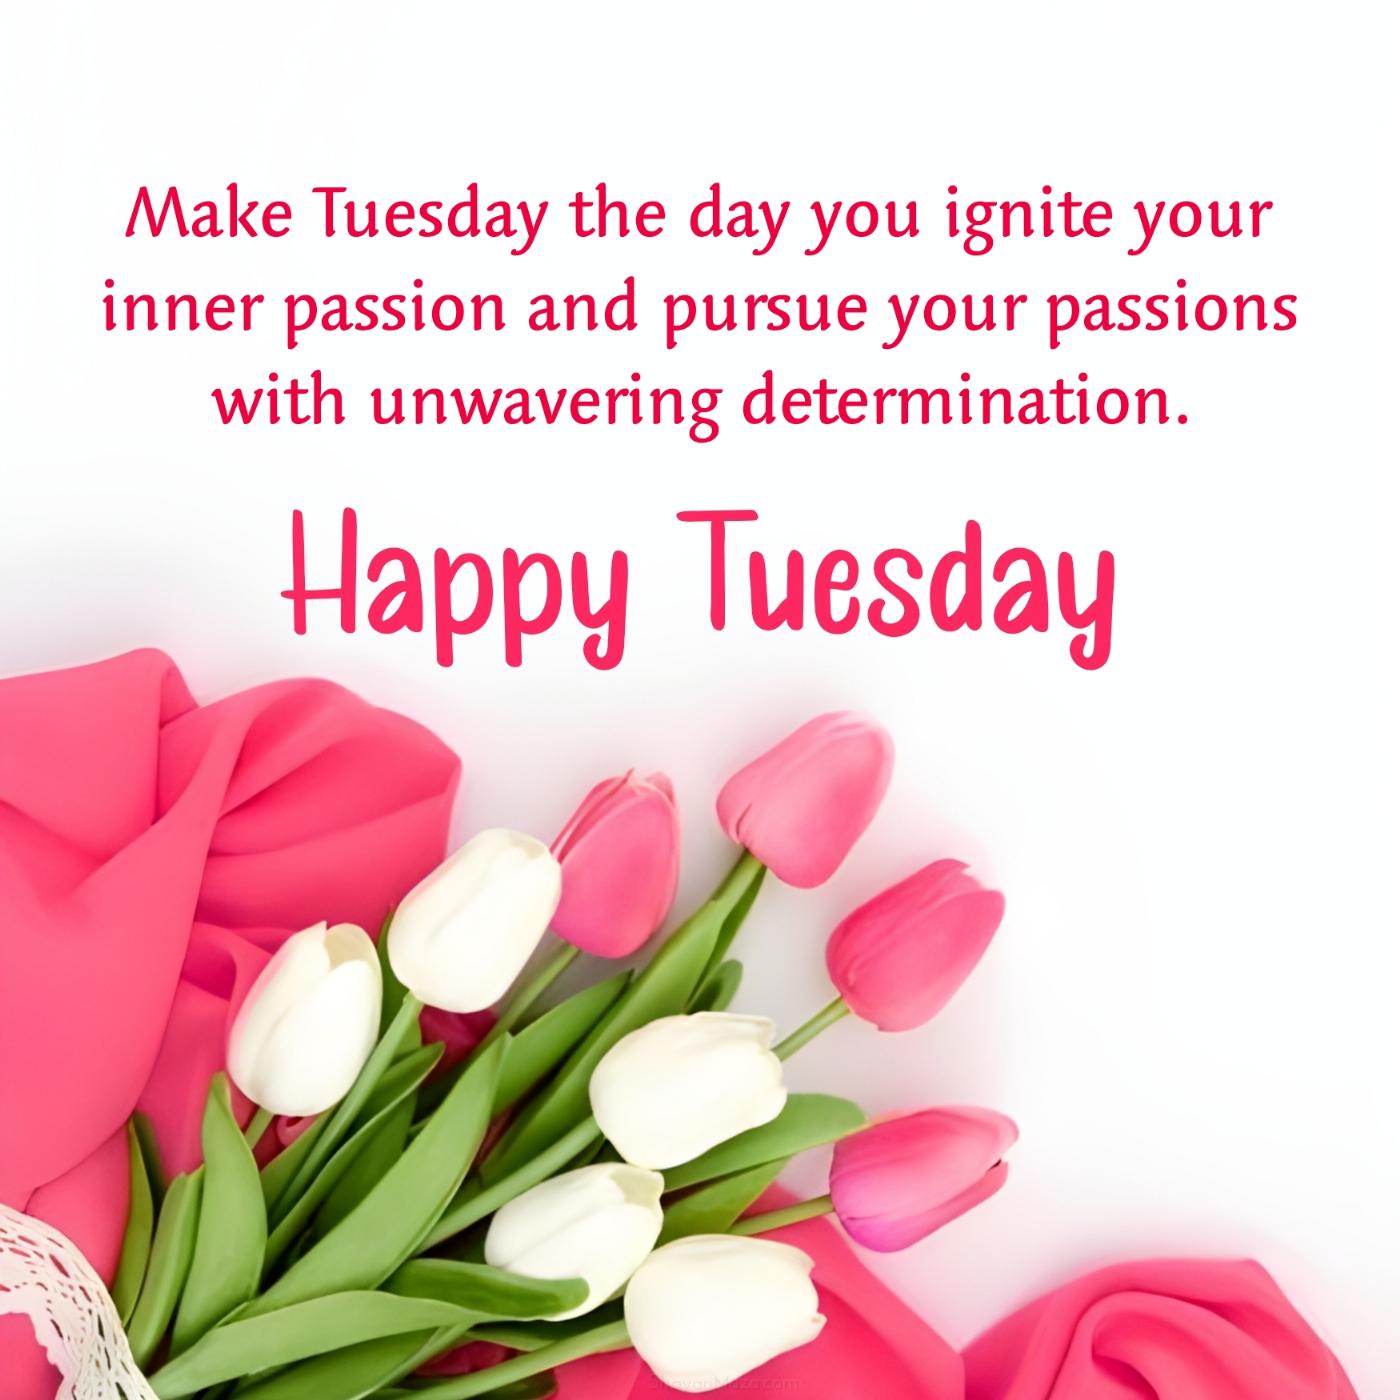 Make Tuesday the day you ignite your inner passion